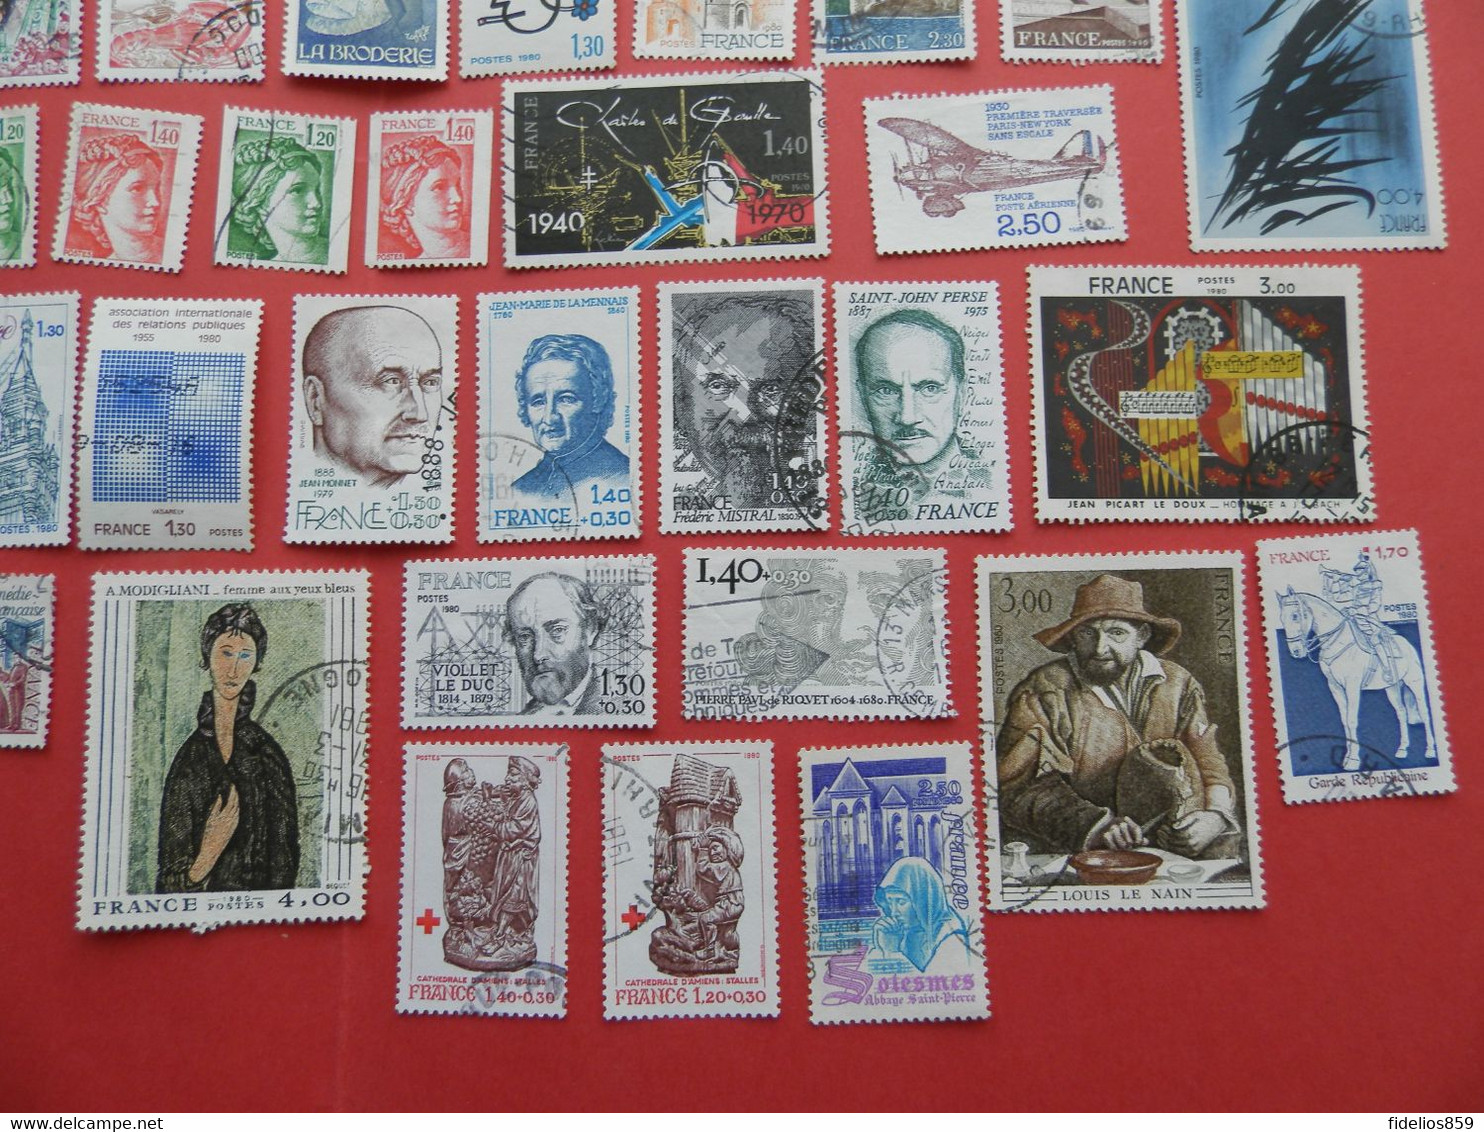 FRANCE OBLITERES : ANNEE COMPLETE 1980 SOIT 45 TIMBRES POSTE DIFFERENTS 1ER CHOIX - 1980-1989